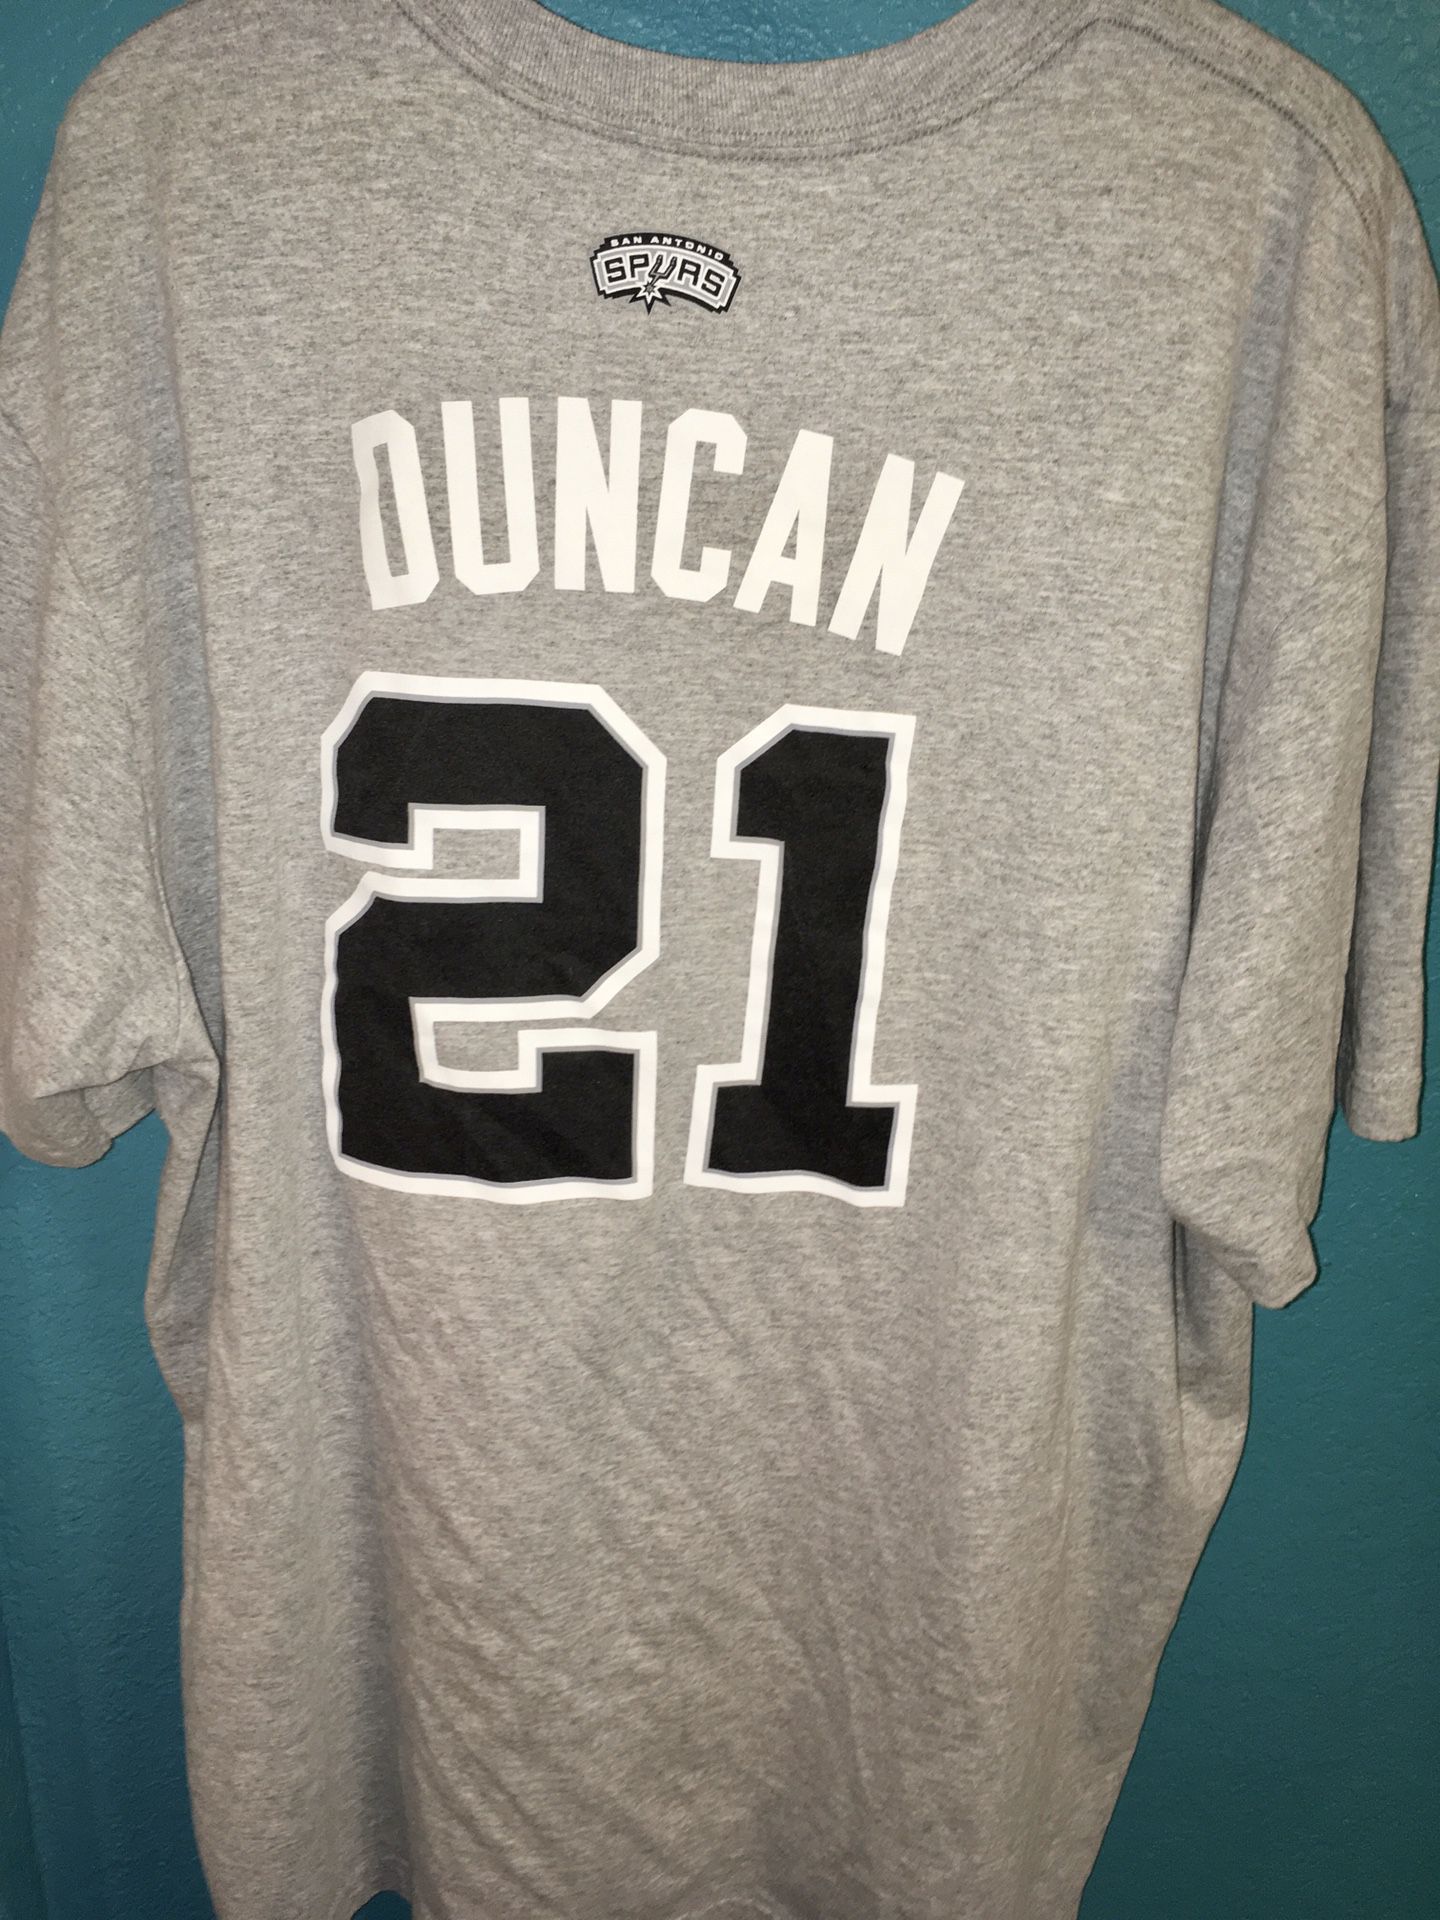 Tim Duncan adult 3XL Jersey shirt for Sale in San Antonio, TX